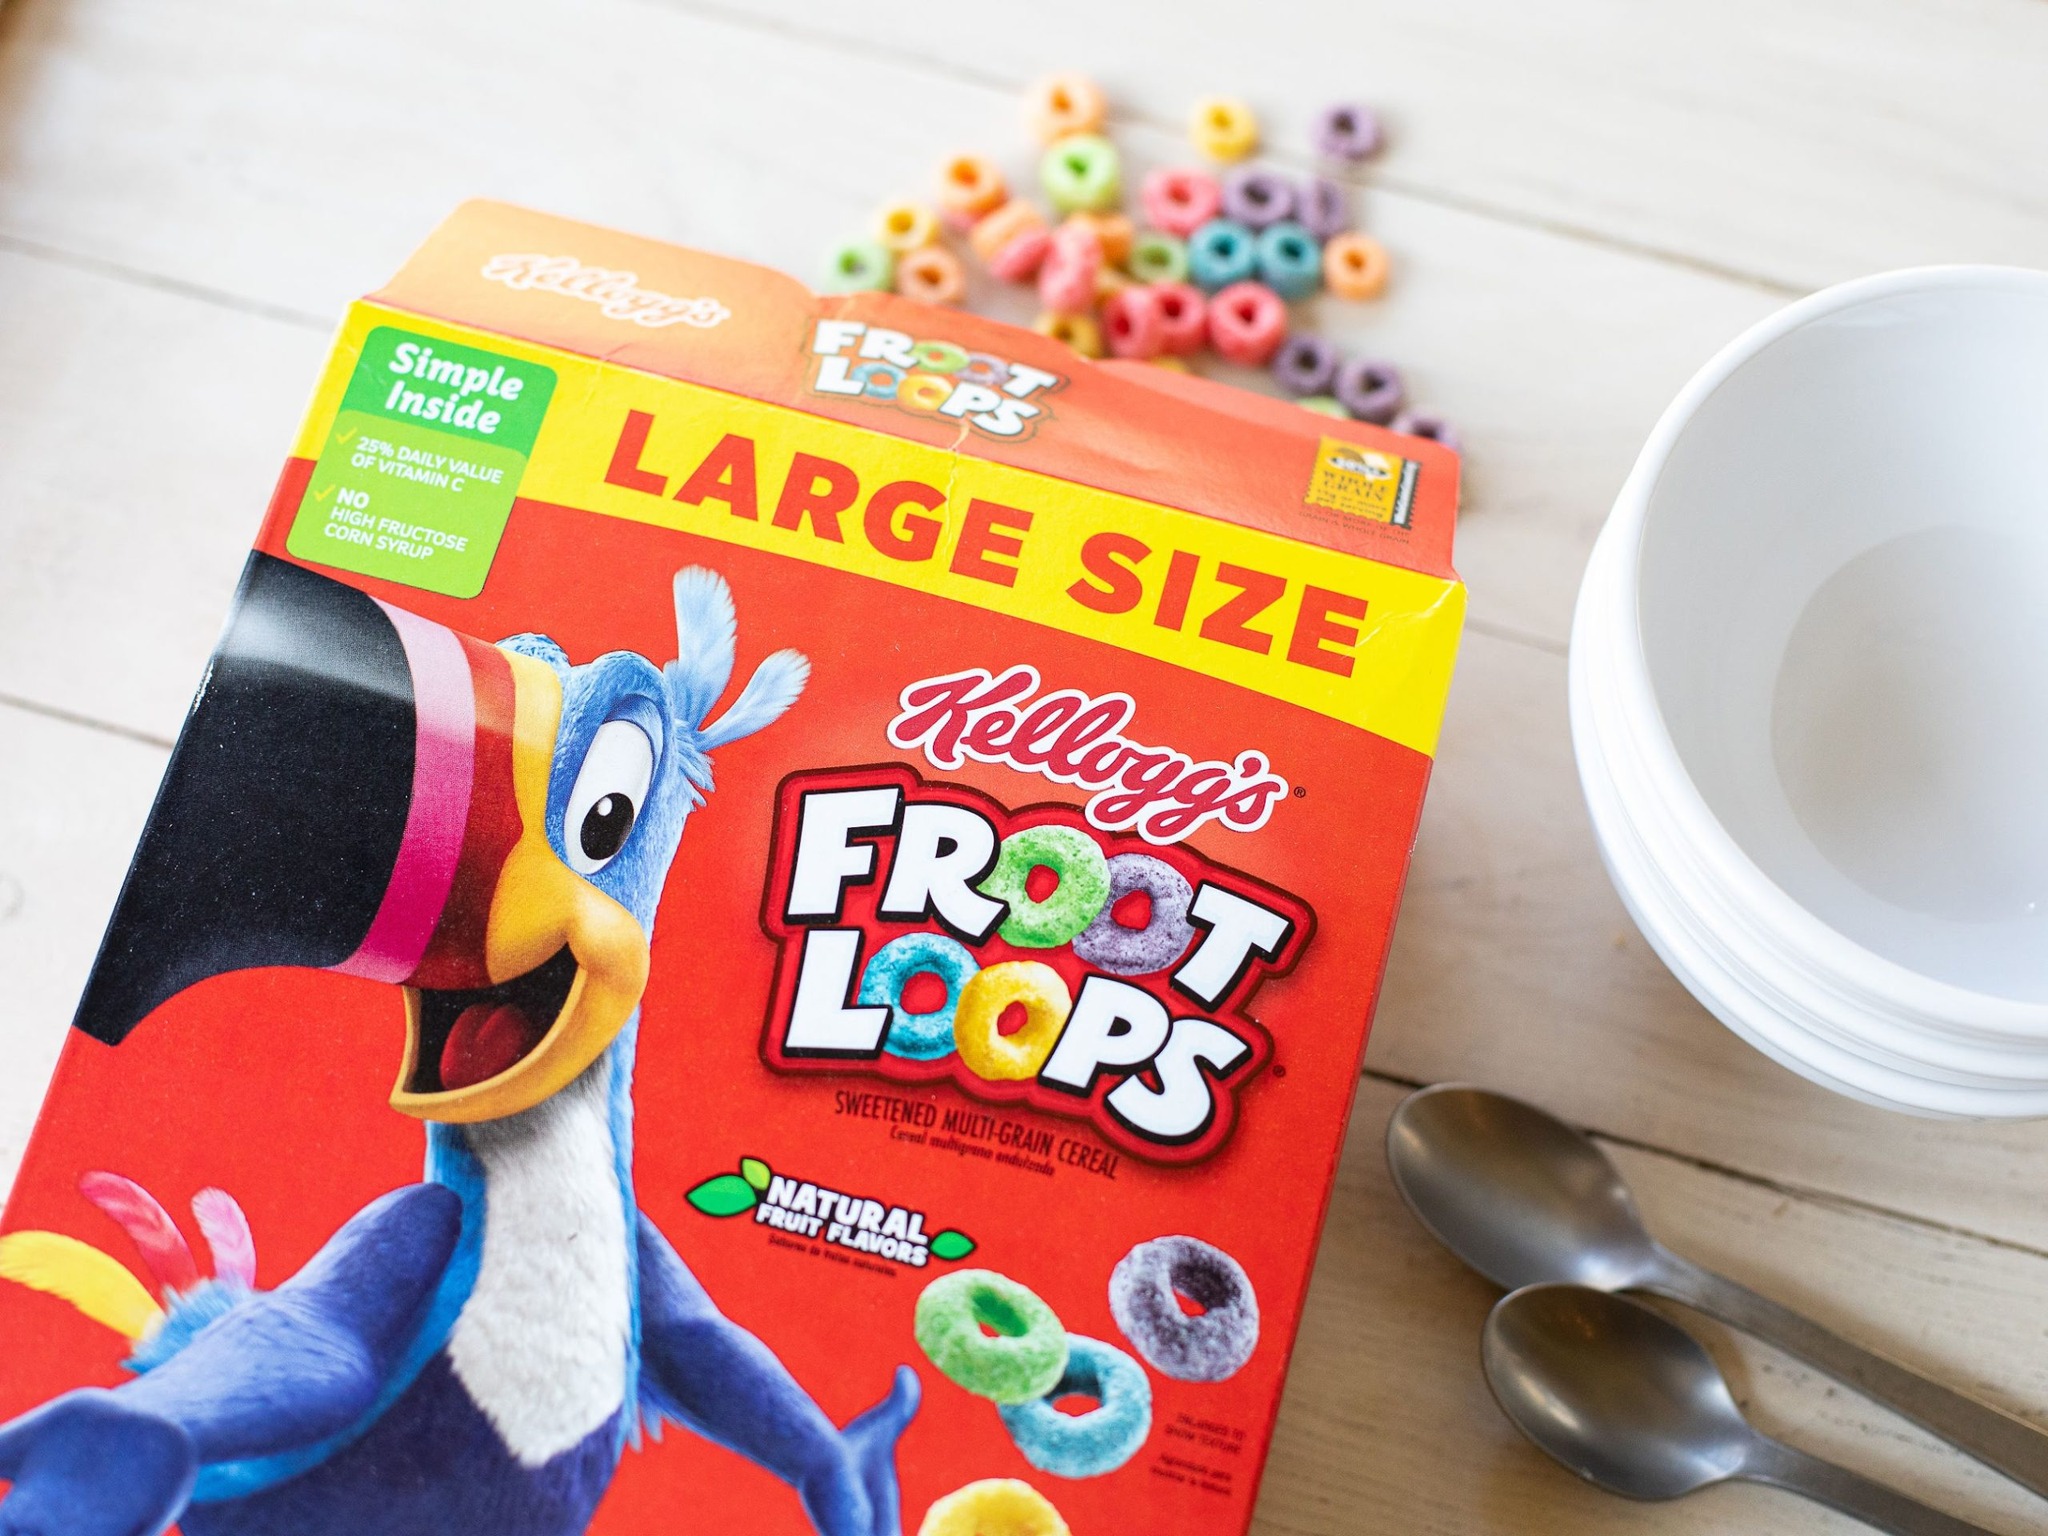 Big Boxes Of Kellogg’s Froot Loops And Frosted Flakes Just 2 13 At Publix Iheartpublix